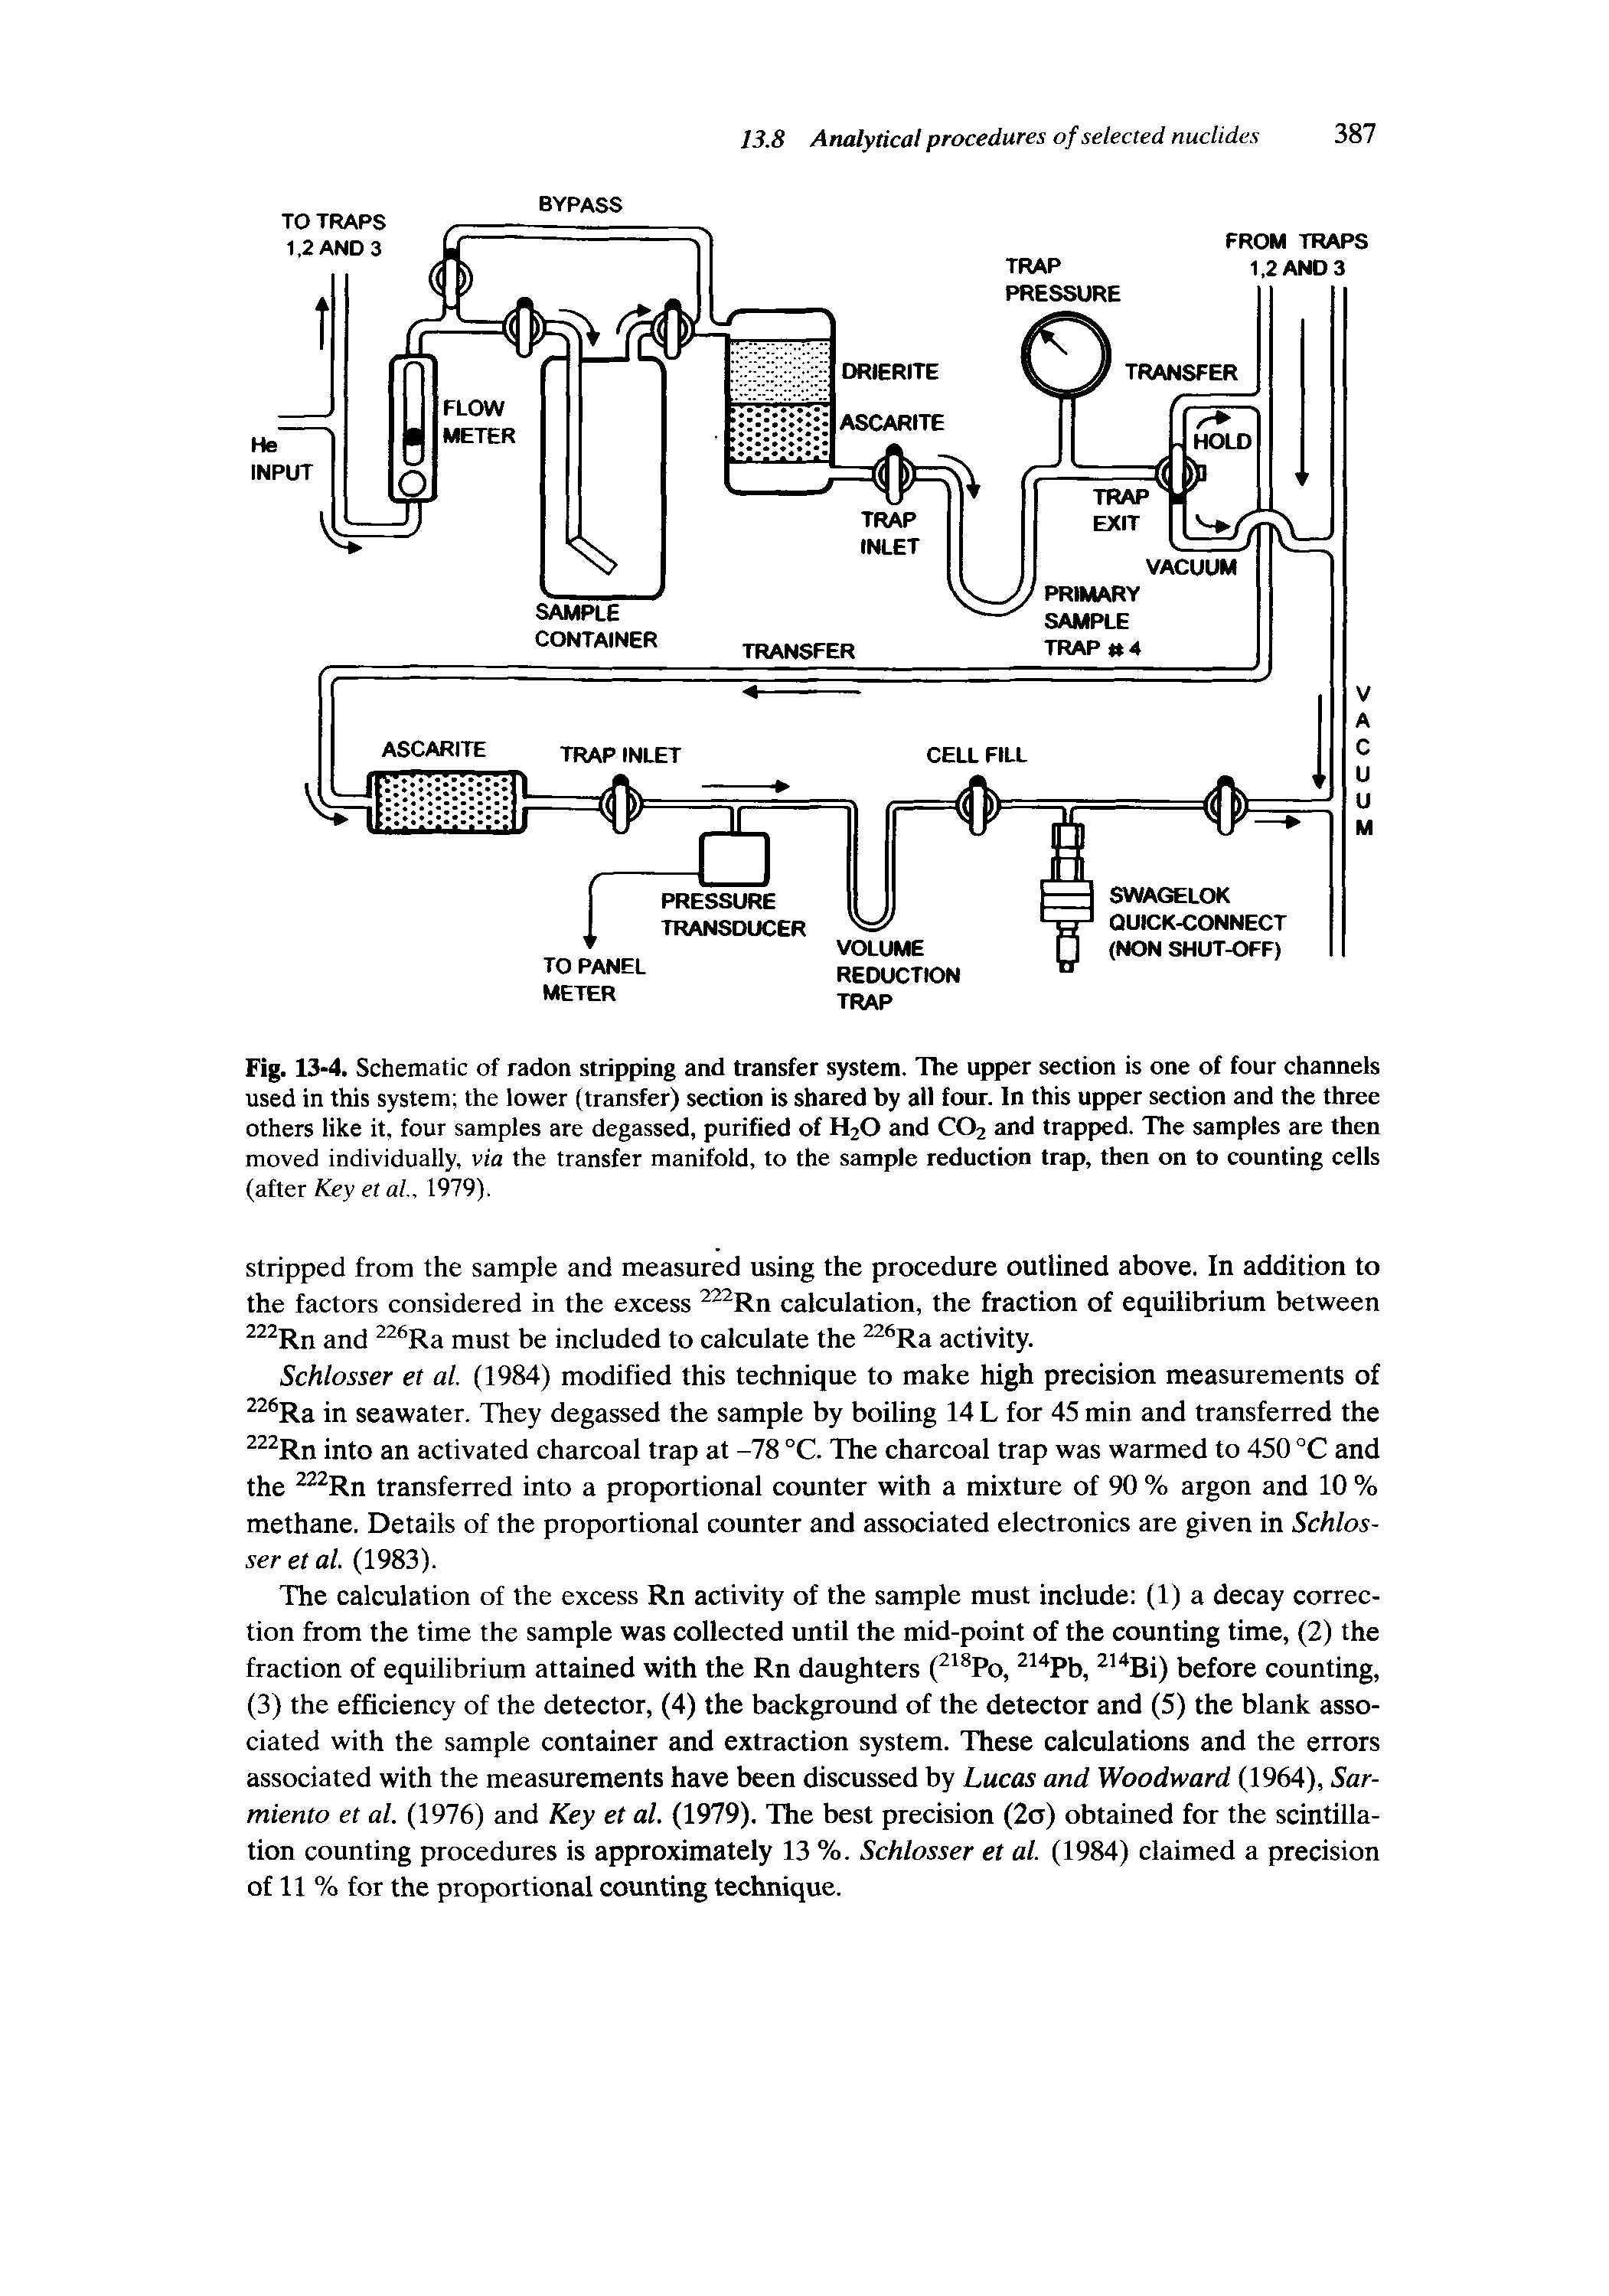 Fig. 13-4. Schematic of radon stripping and transfer system. The upper section is one of four channels used in this system the lower (transfer) section is shared by all four. In this upper section and the three others like it, four samples are degassed, purified of HjO and CO2 and trapped. The samples are then moved individually, via the transfer manifold, to the sample reduction trap, then on to counting cells (after Key et al. 1979).